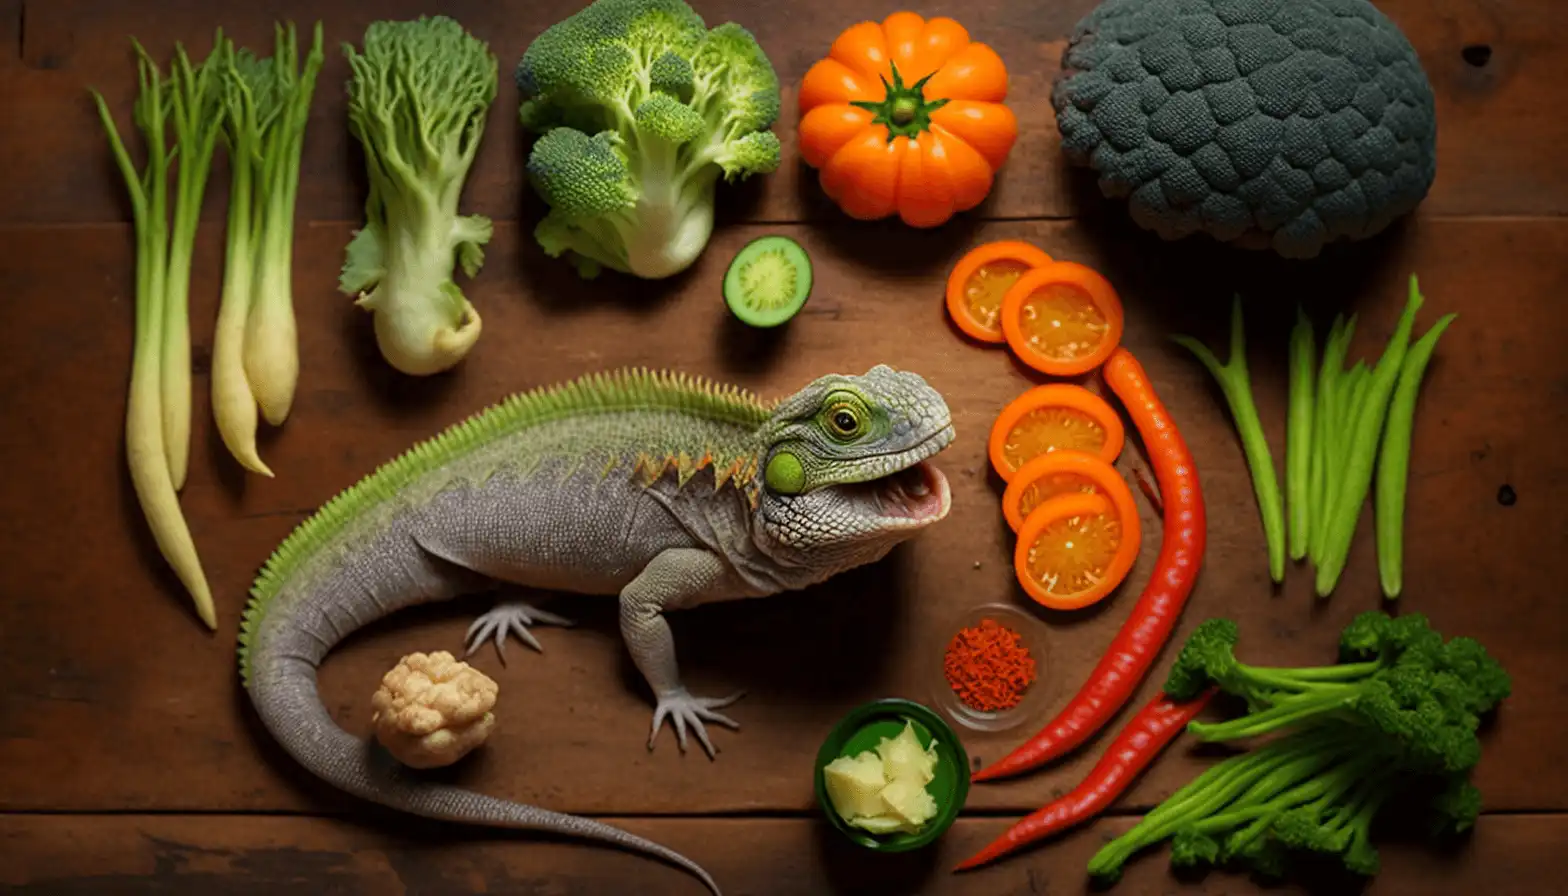 Can Bearded Dragons Eat Broccoli?